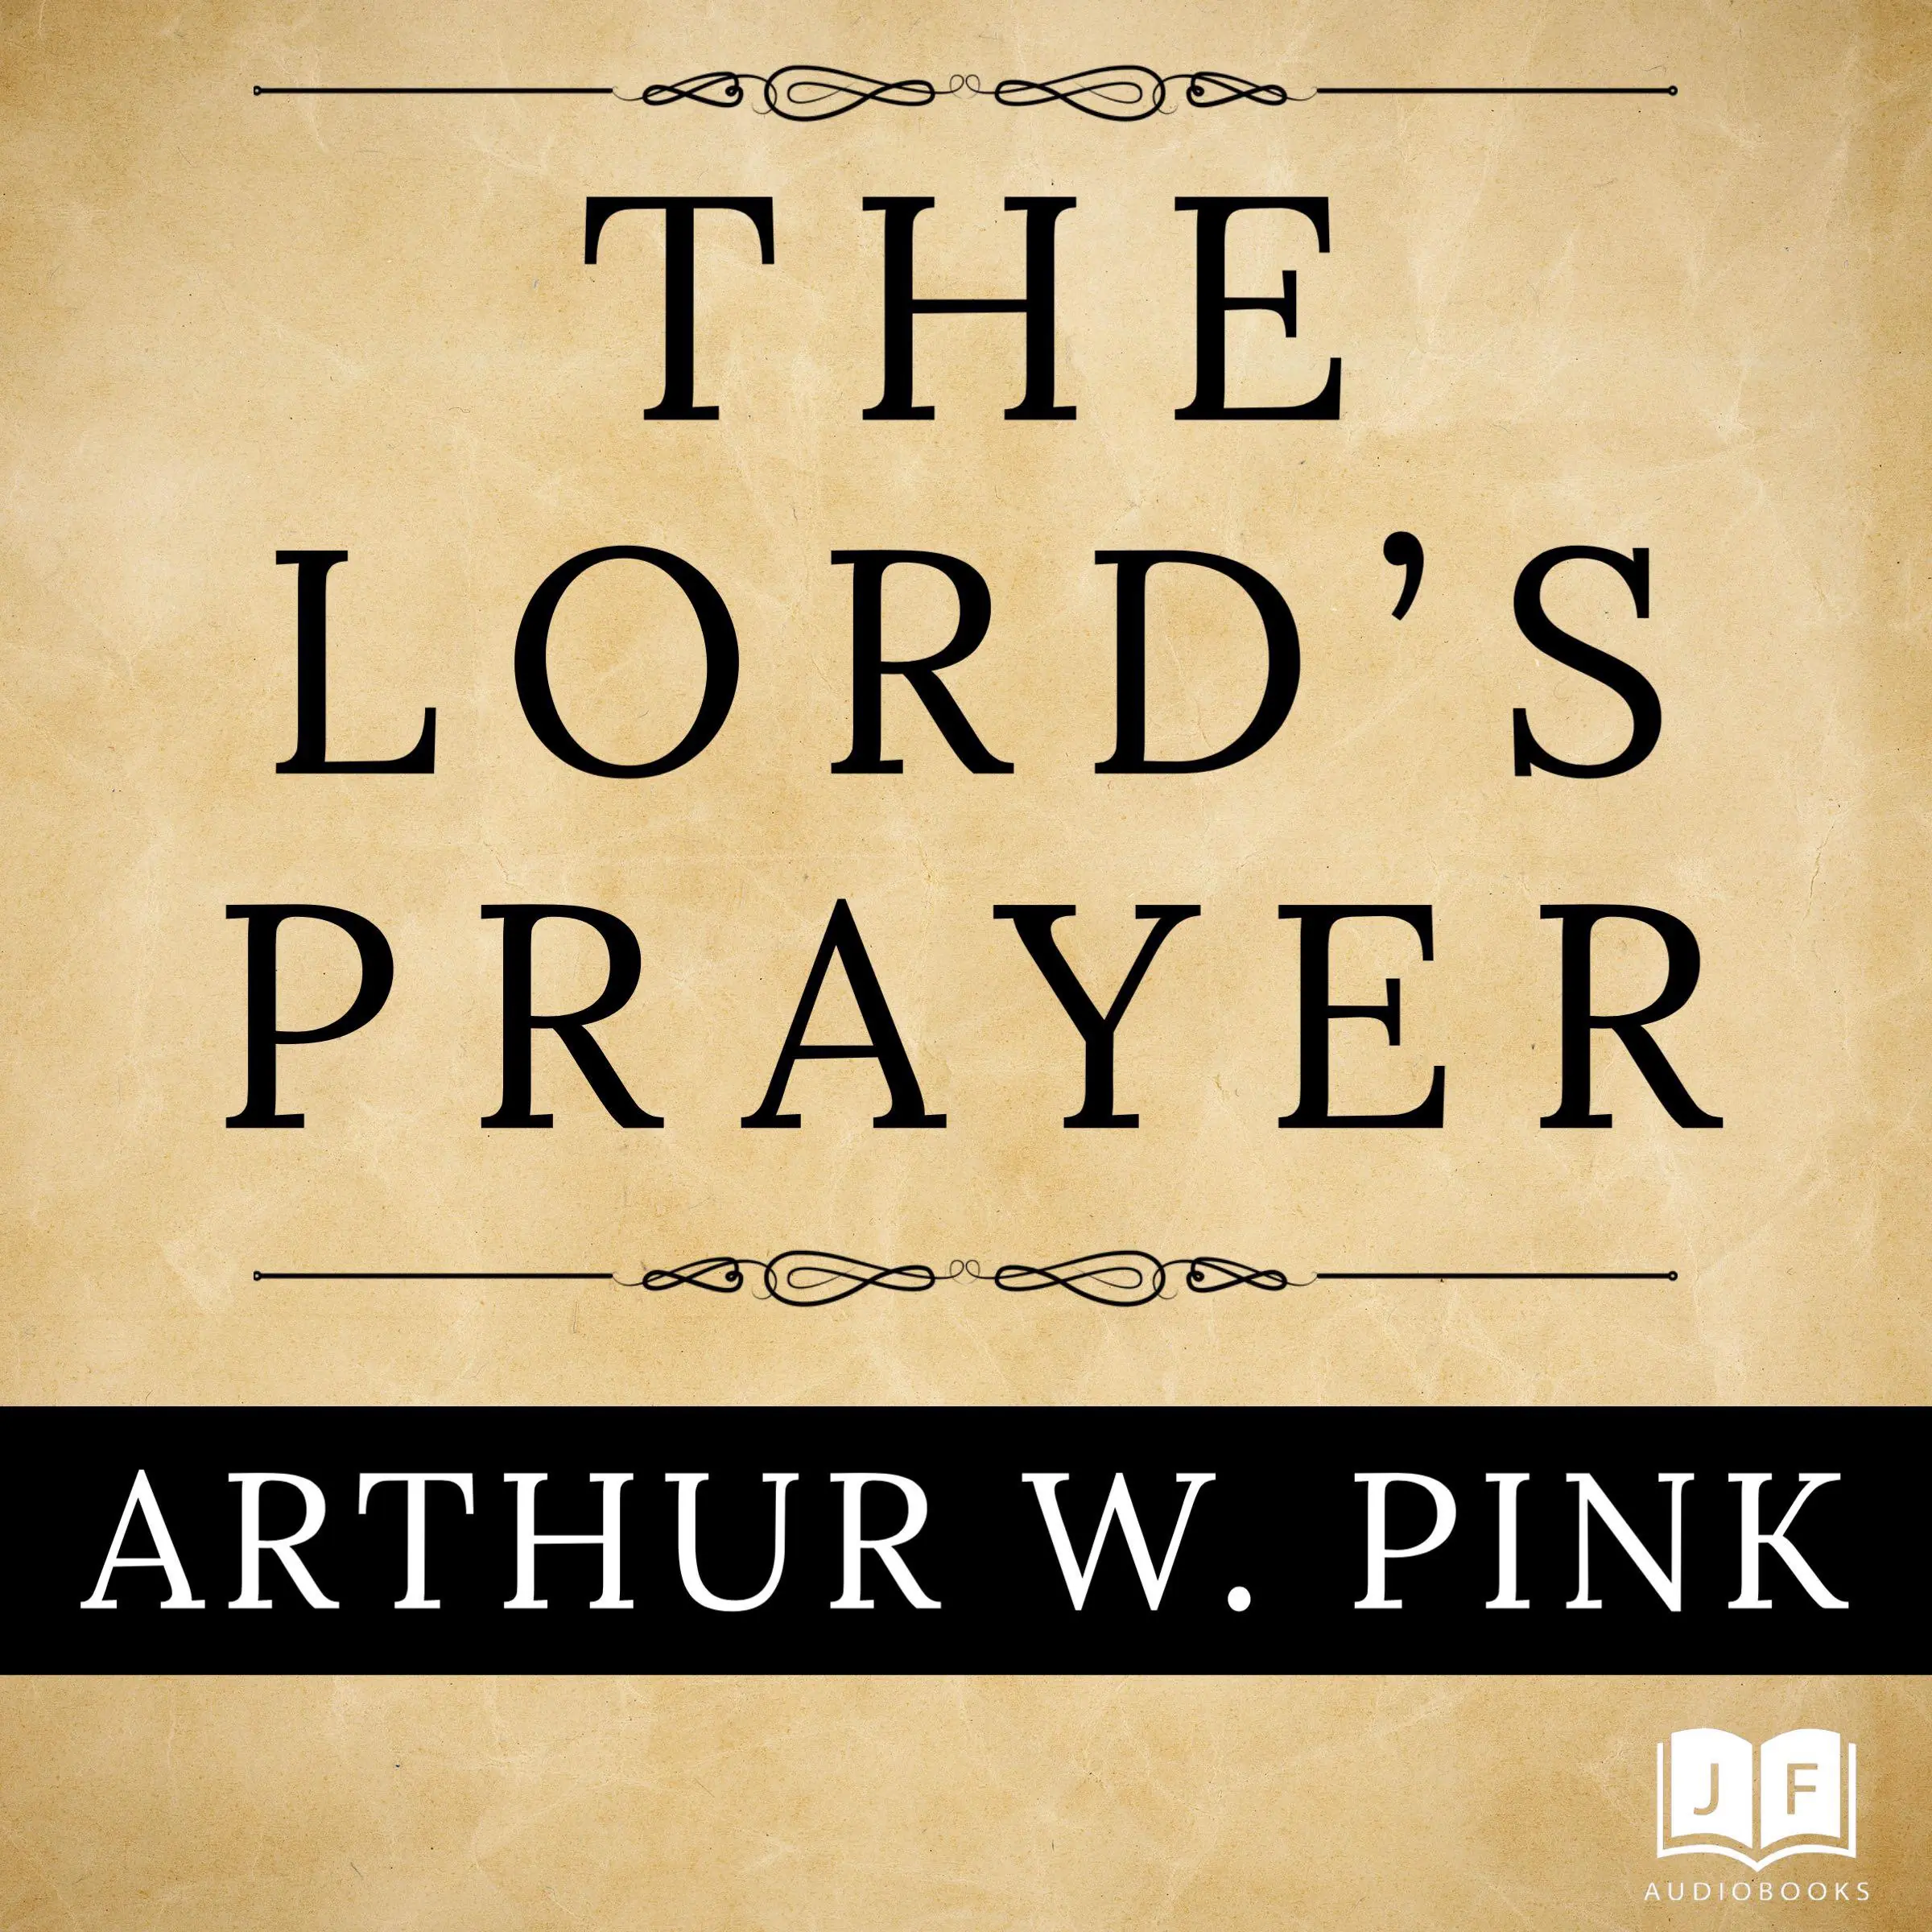 The Lord's Prayer Audiobook by Arthur W. Pink